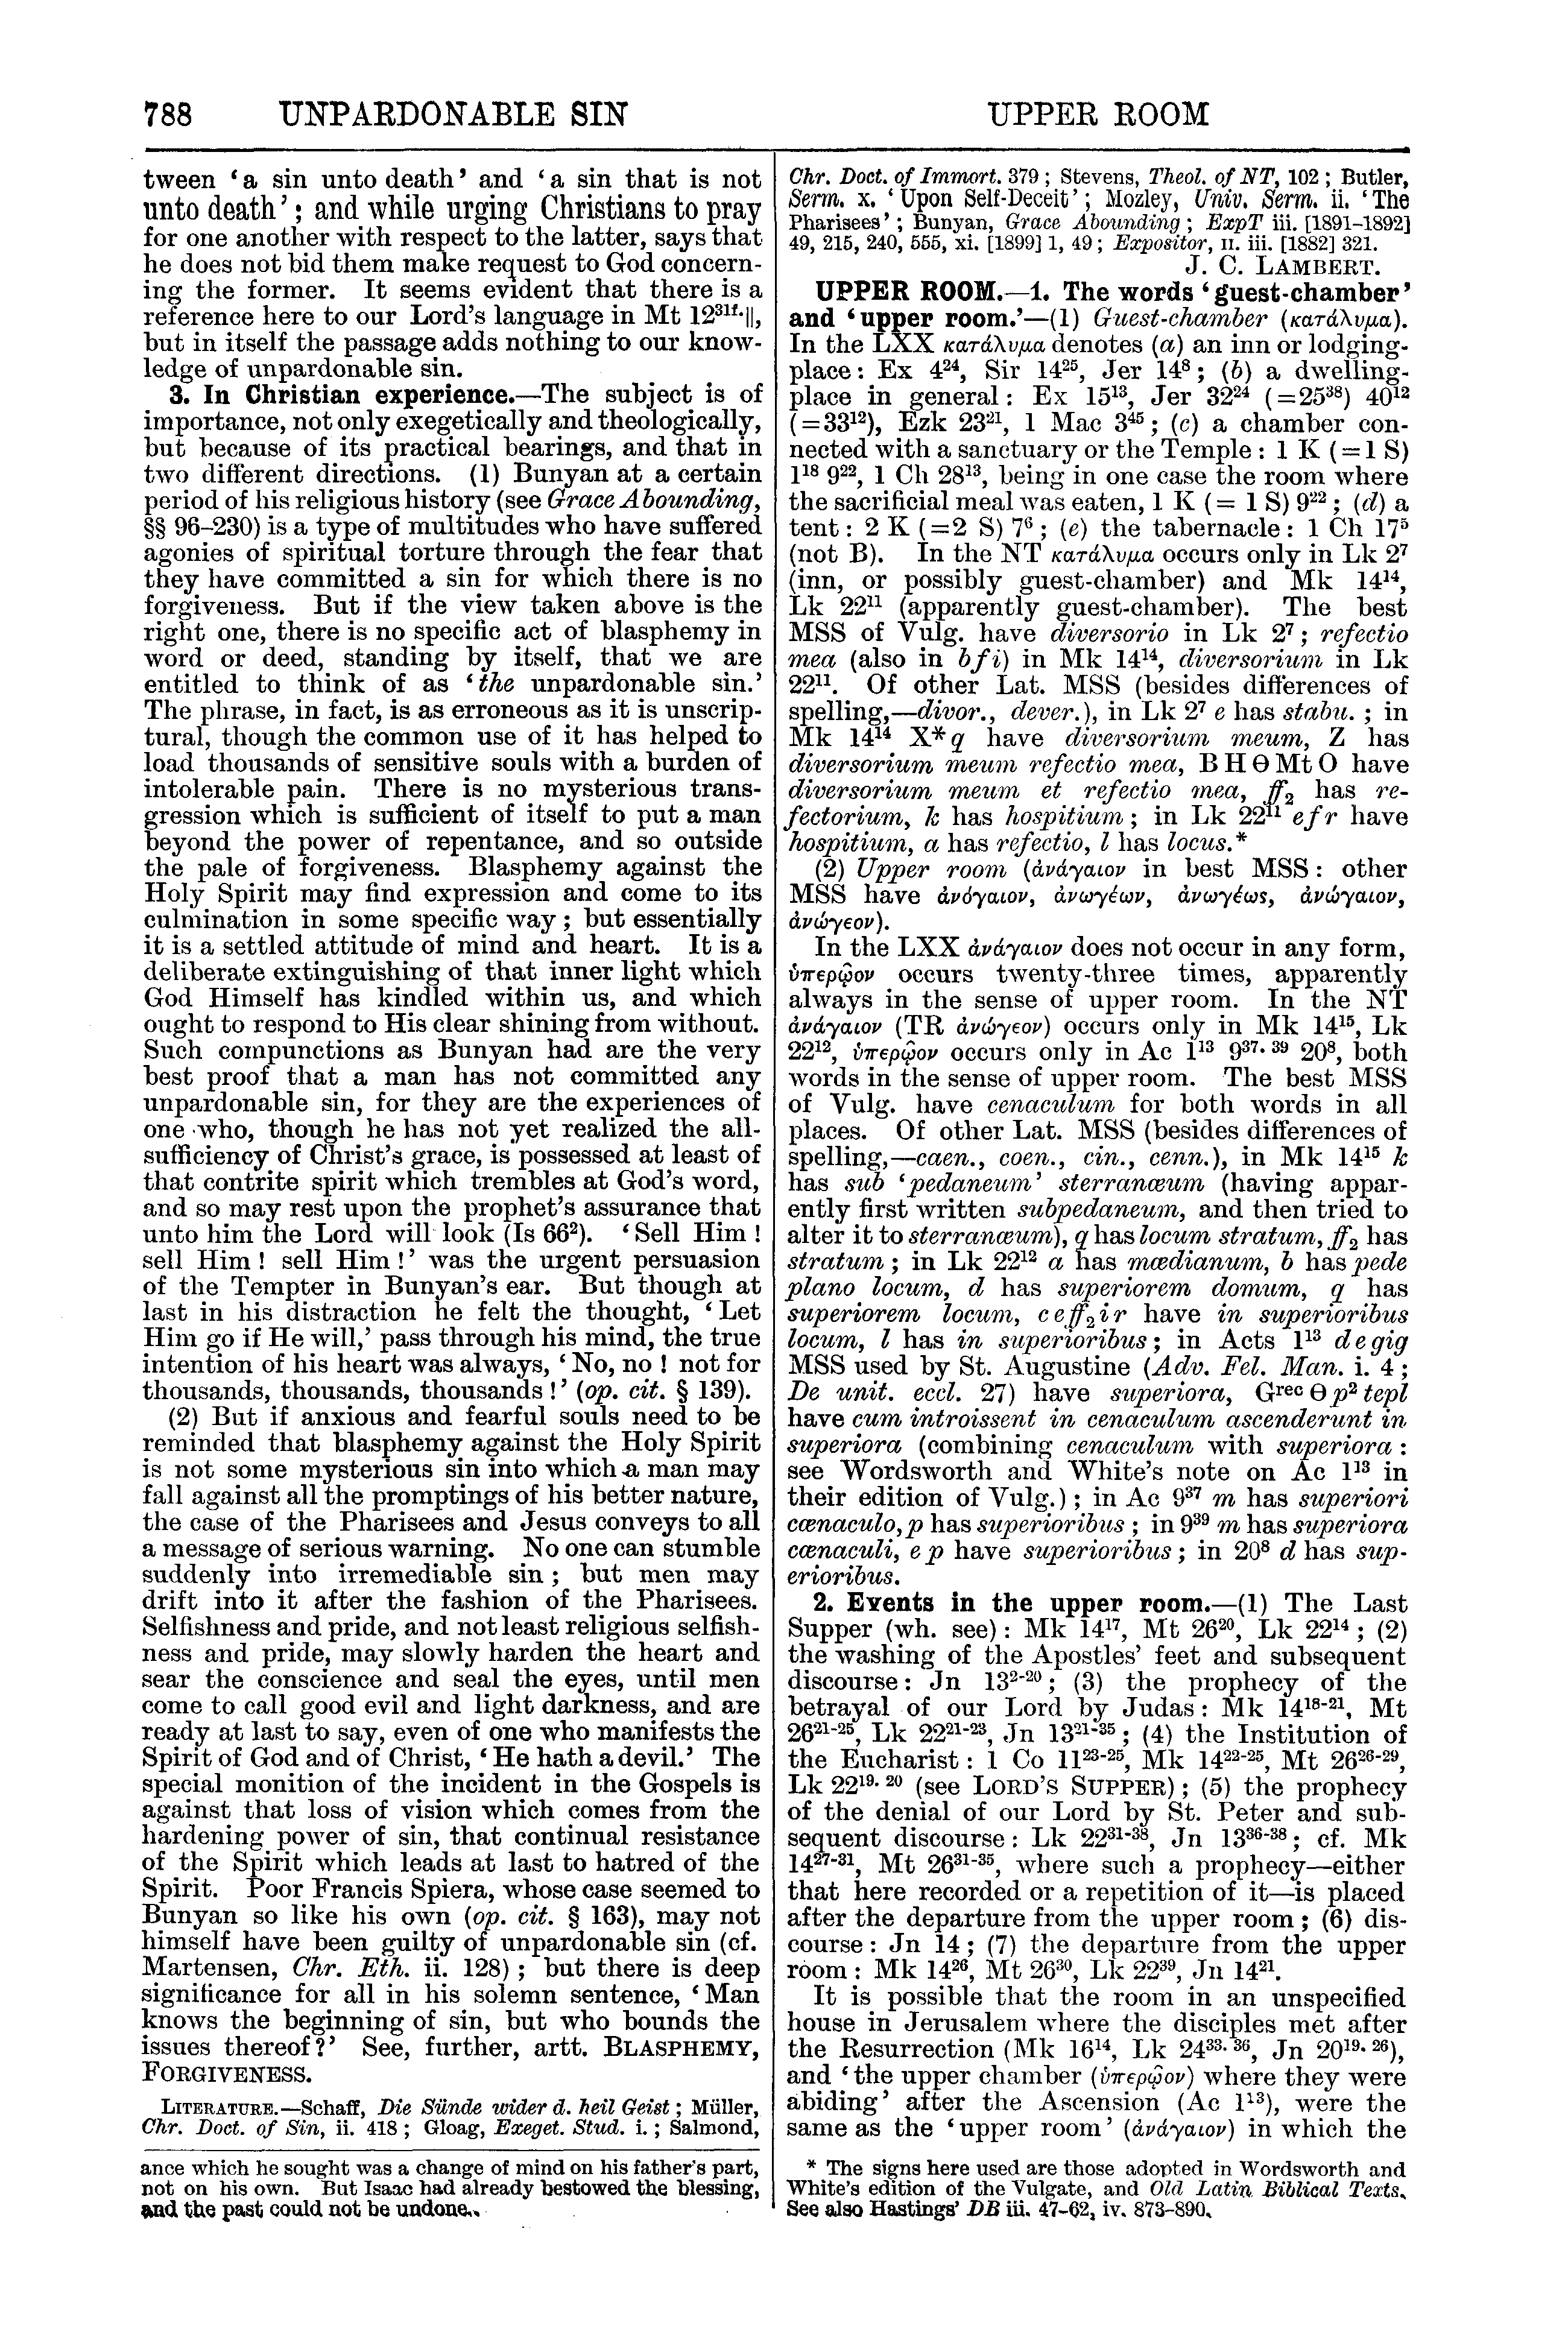 Image of page 788